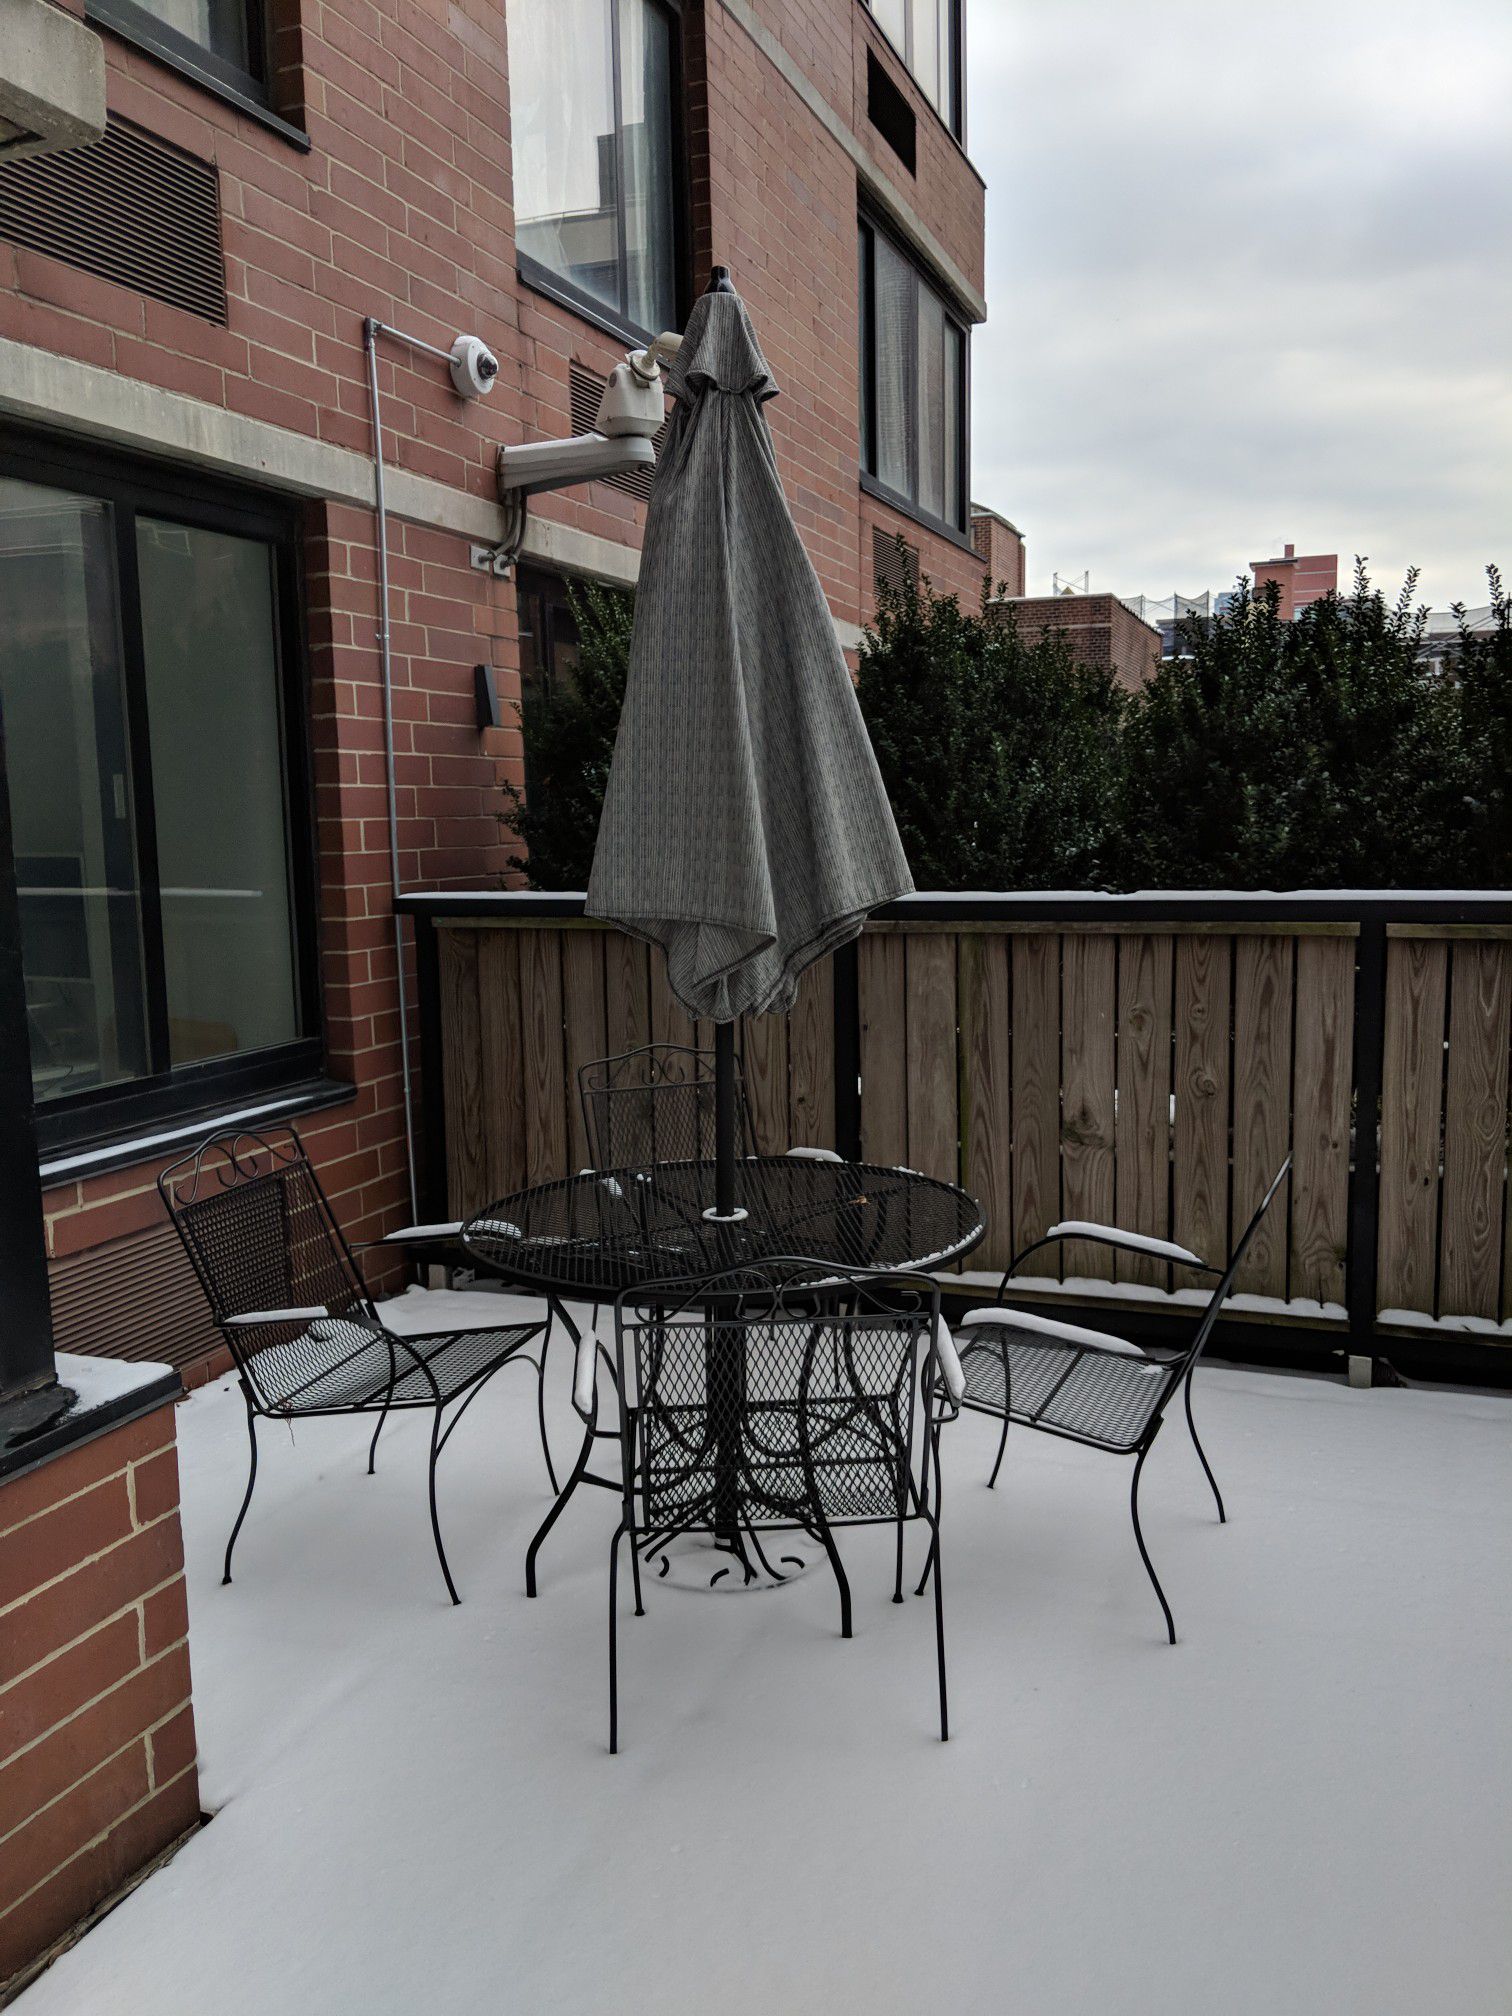 Home Depot Patio all metal table, chairs (4), umbrella (Nantucket set from Home Depot)